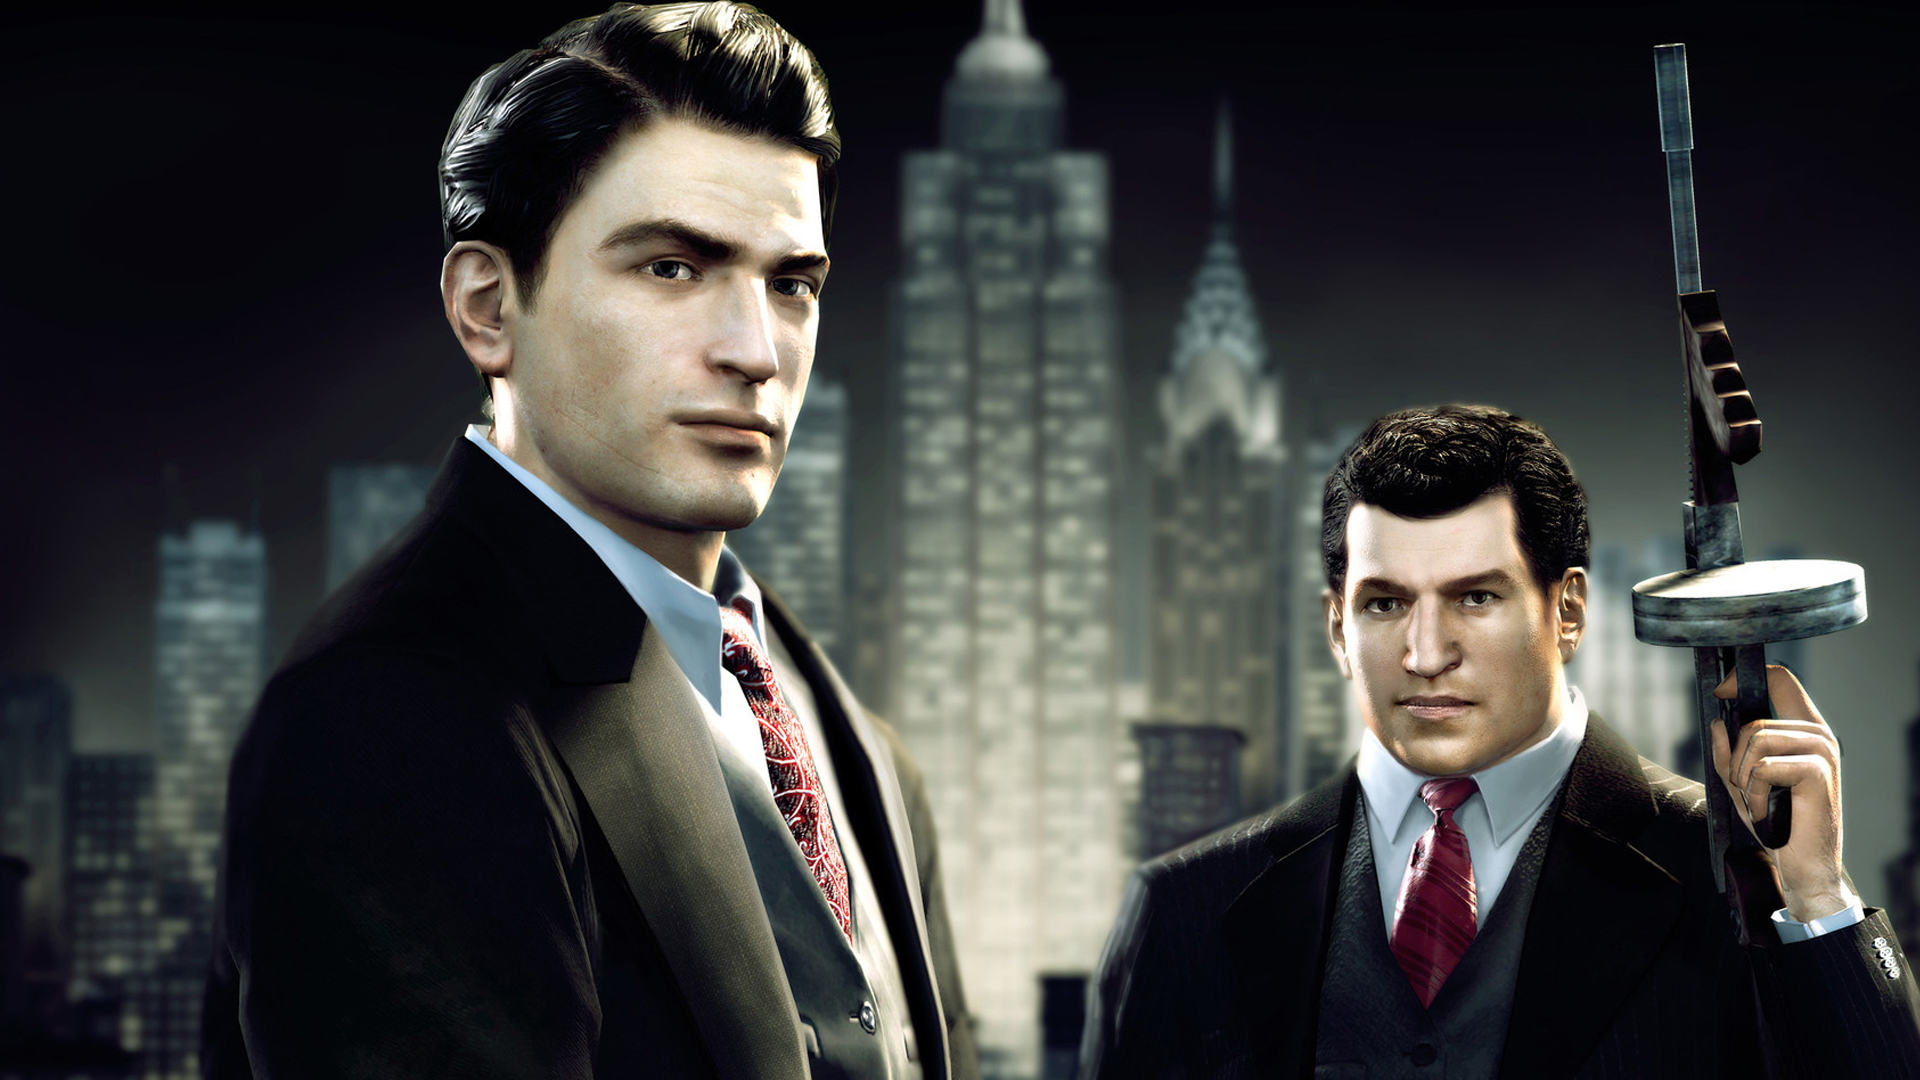 Mafia 4 puts out an offer you can’t refuse amid development update